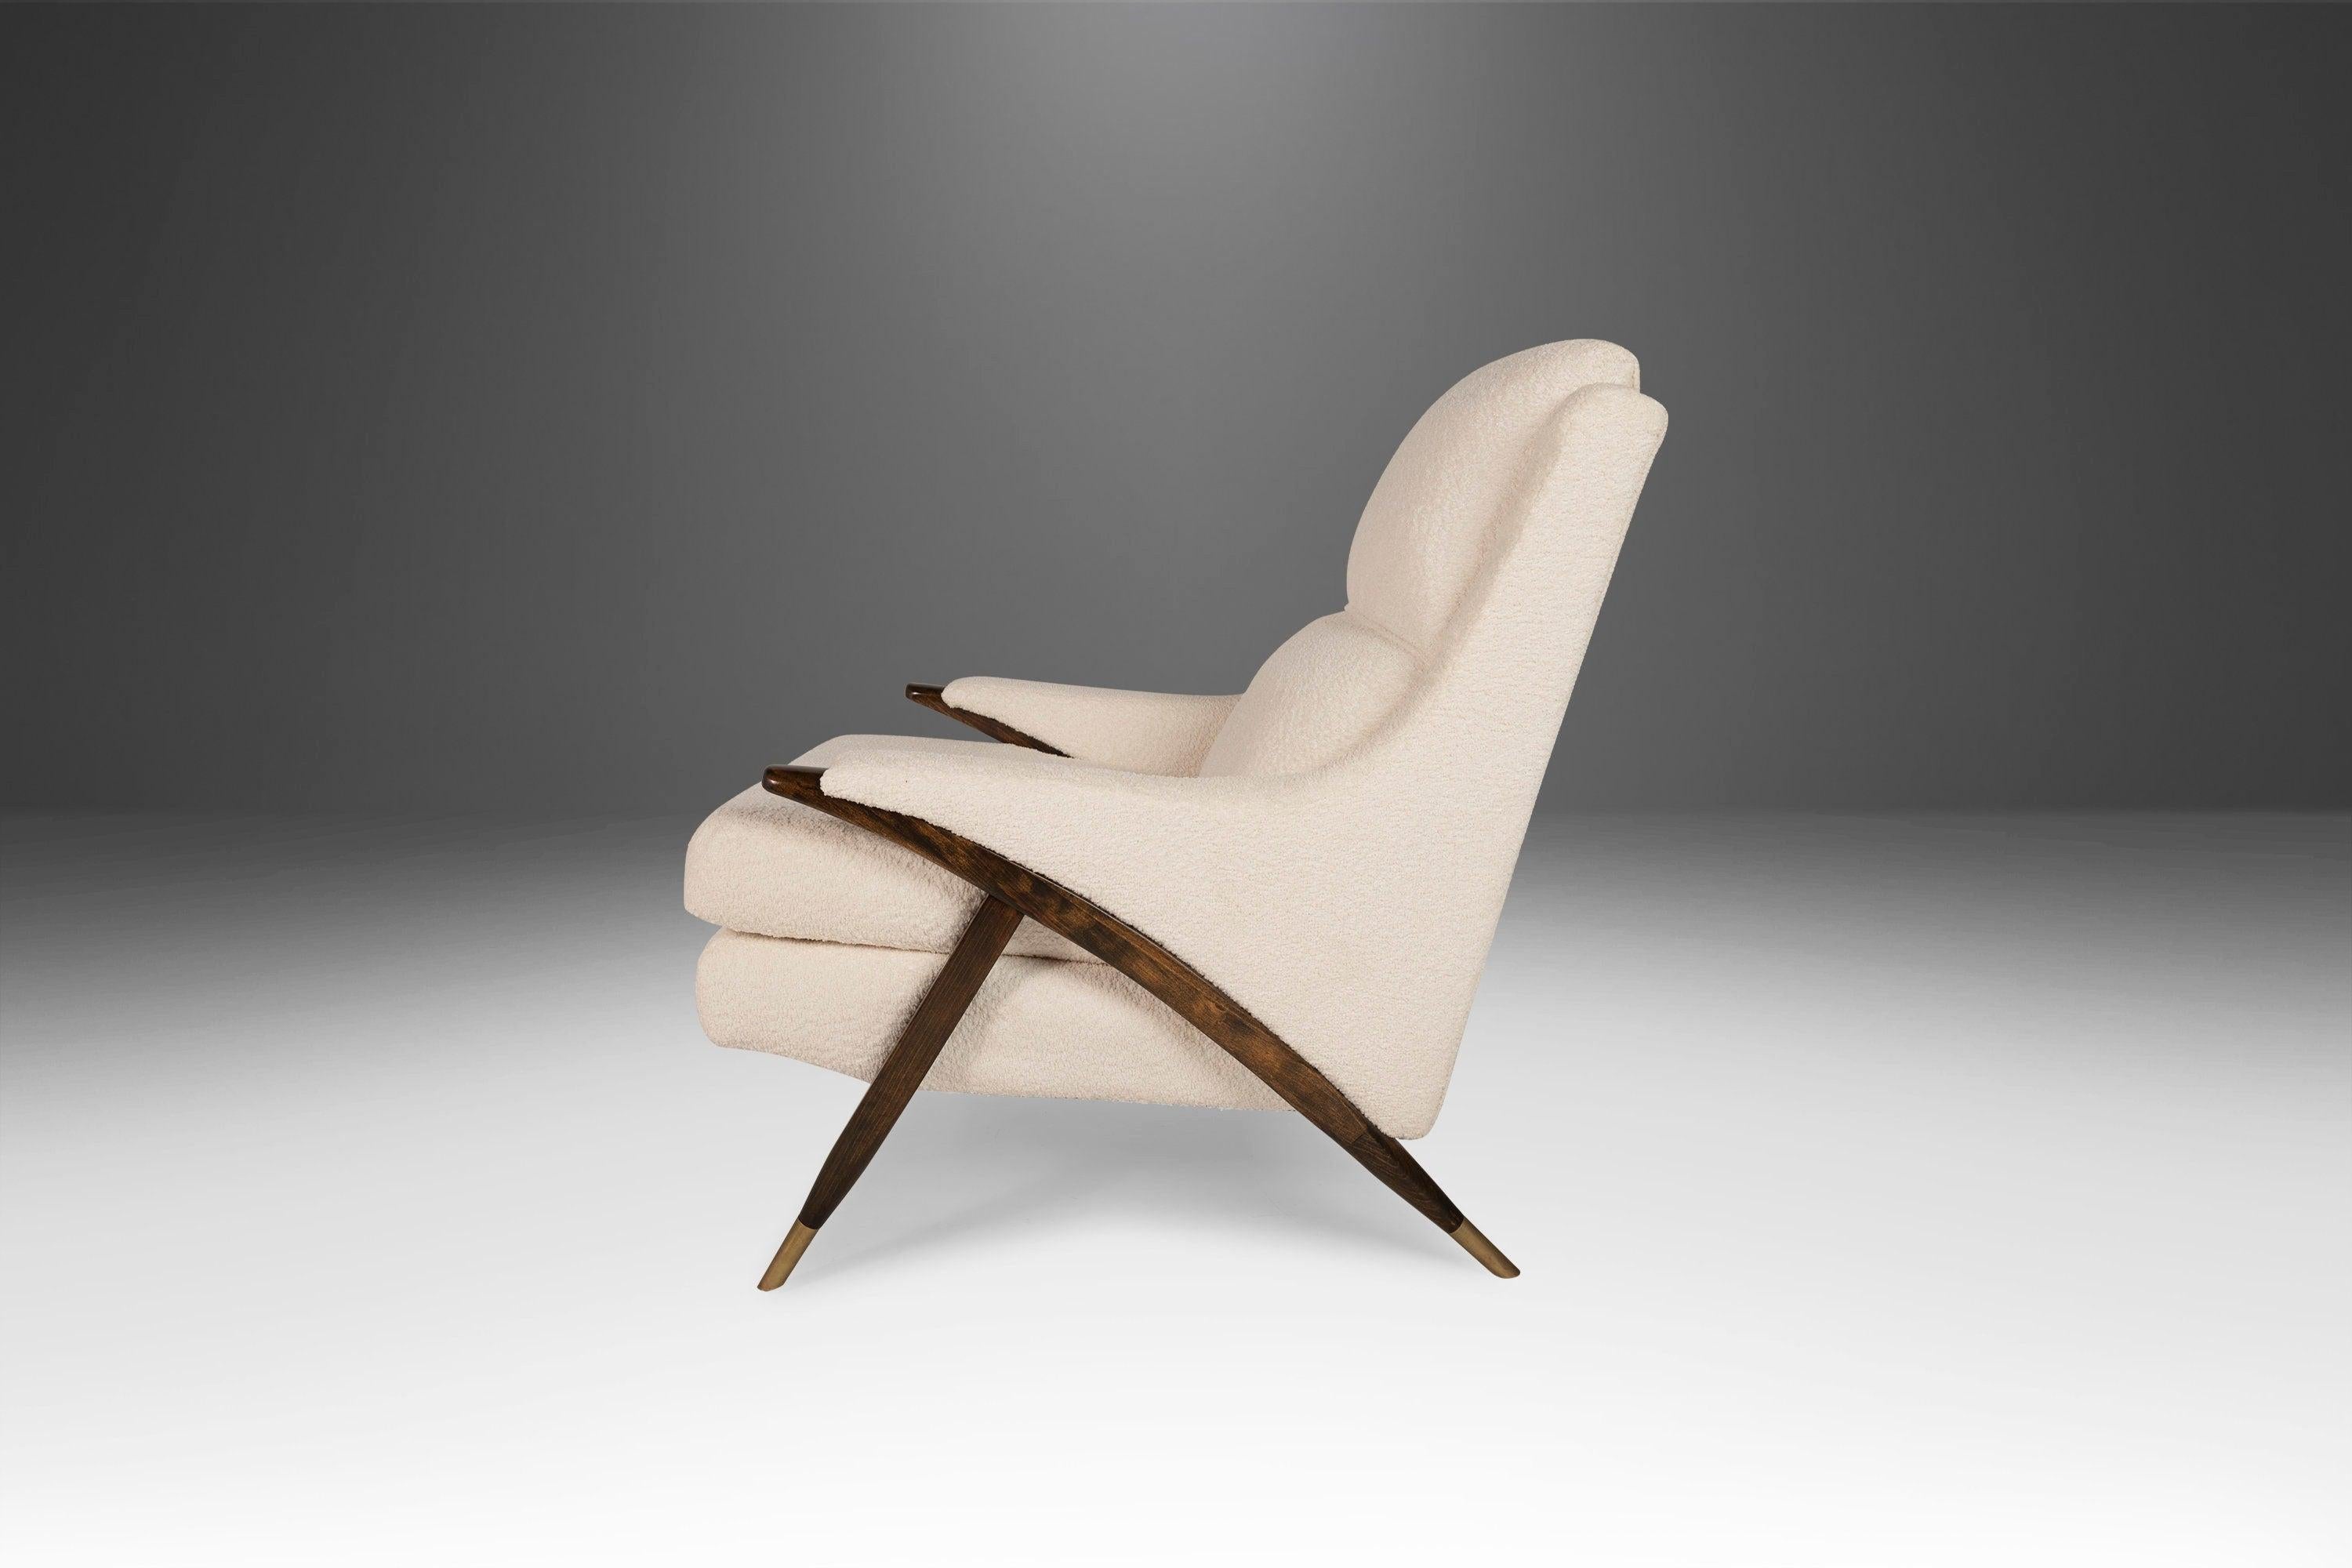 This installation ready Lounge Chair by Karpen of California is a fantastic choice for collectors or interior designers. A well-designed chair that is comfortable, striking and ready for your home or office interior design. The piece has been newly